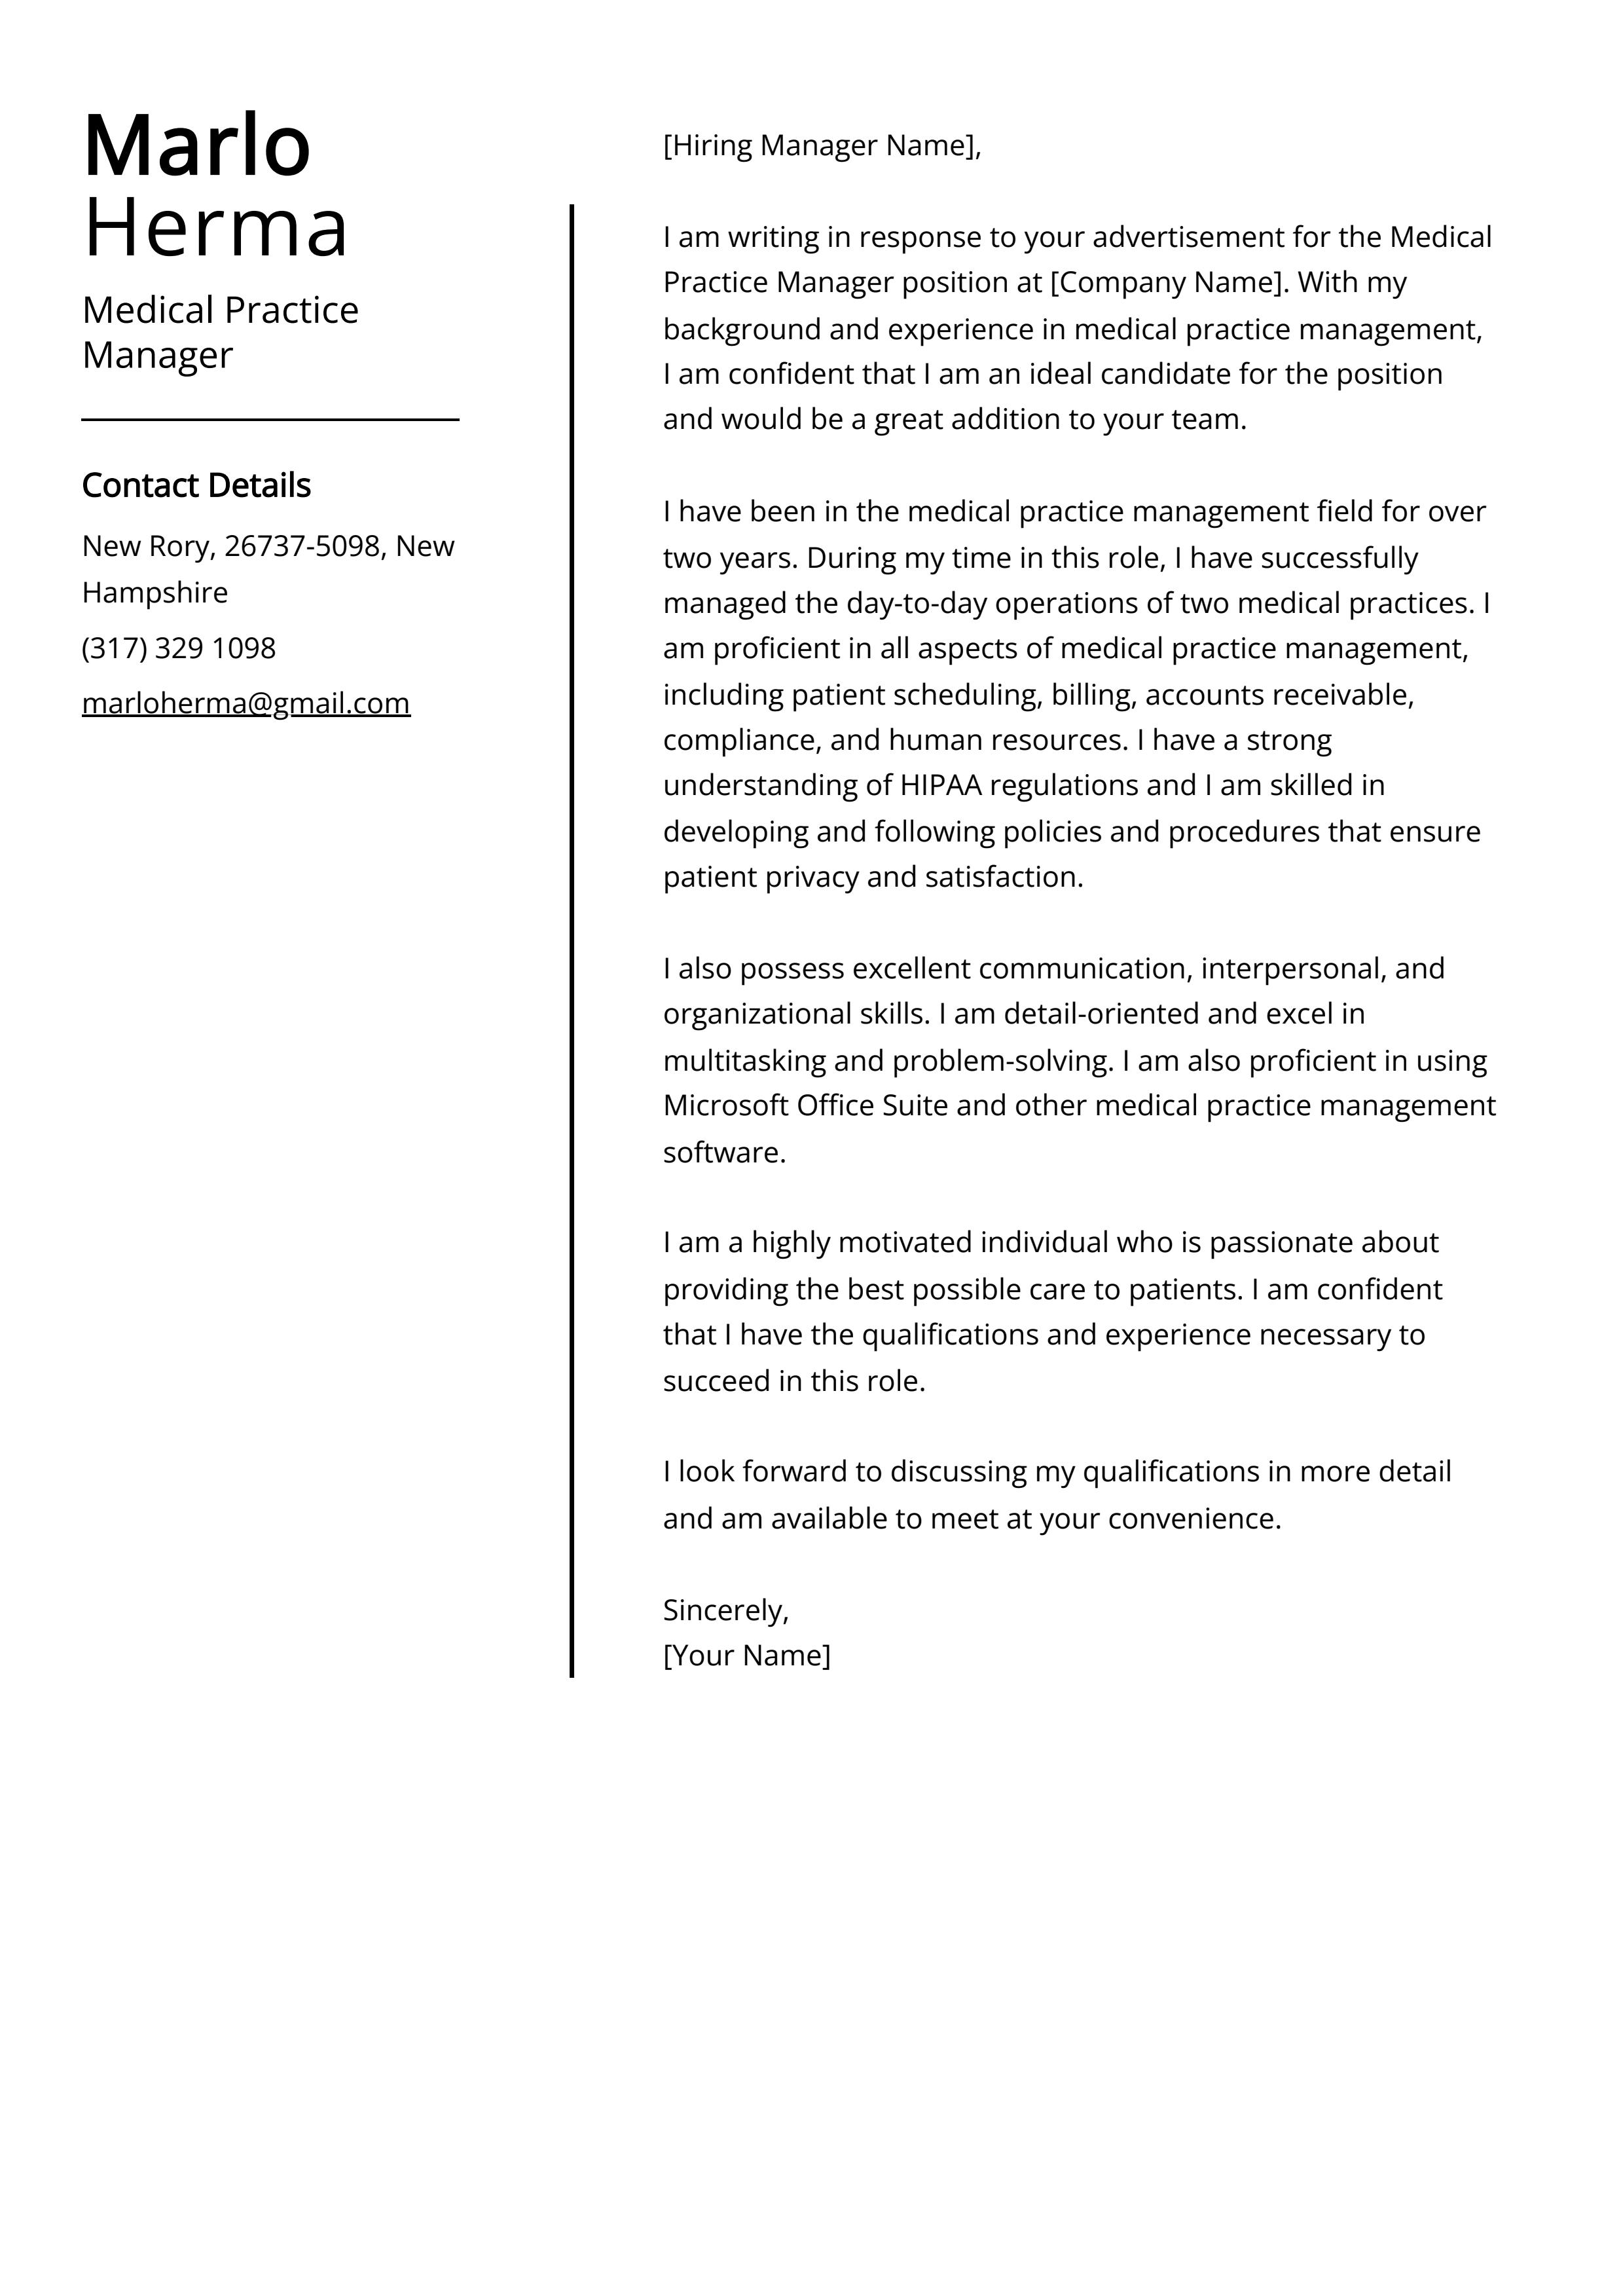 Medical Practice Manager Cover Letter Example